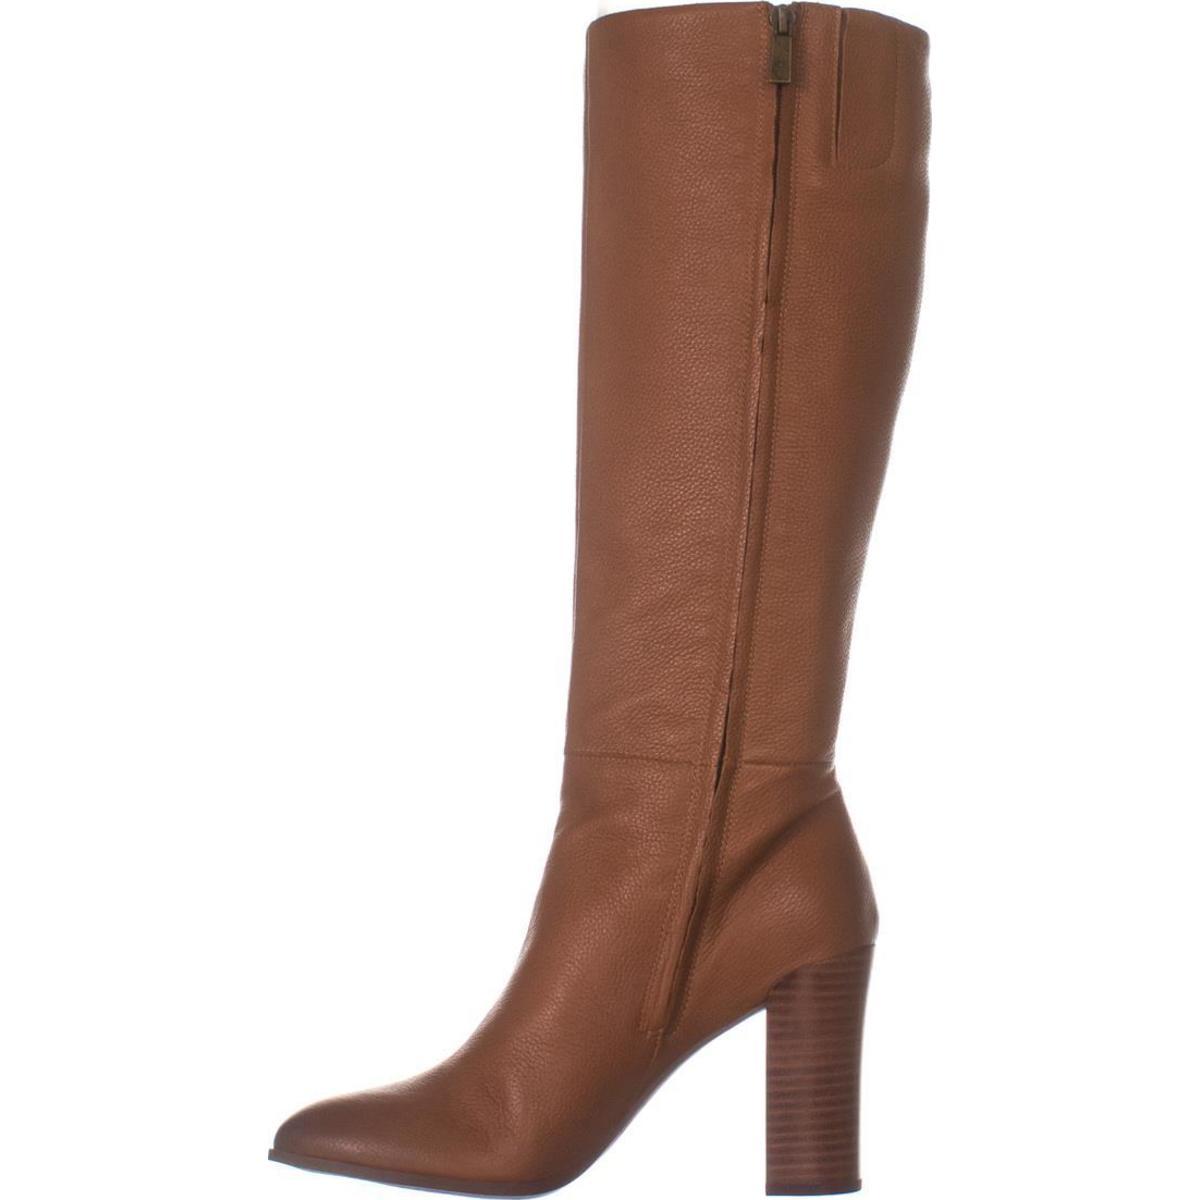 Kenneth Cole New York Justin Heeled Knee High Dress Boots 963, Cognac